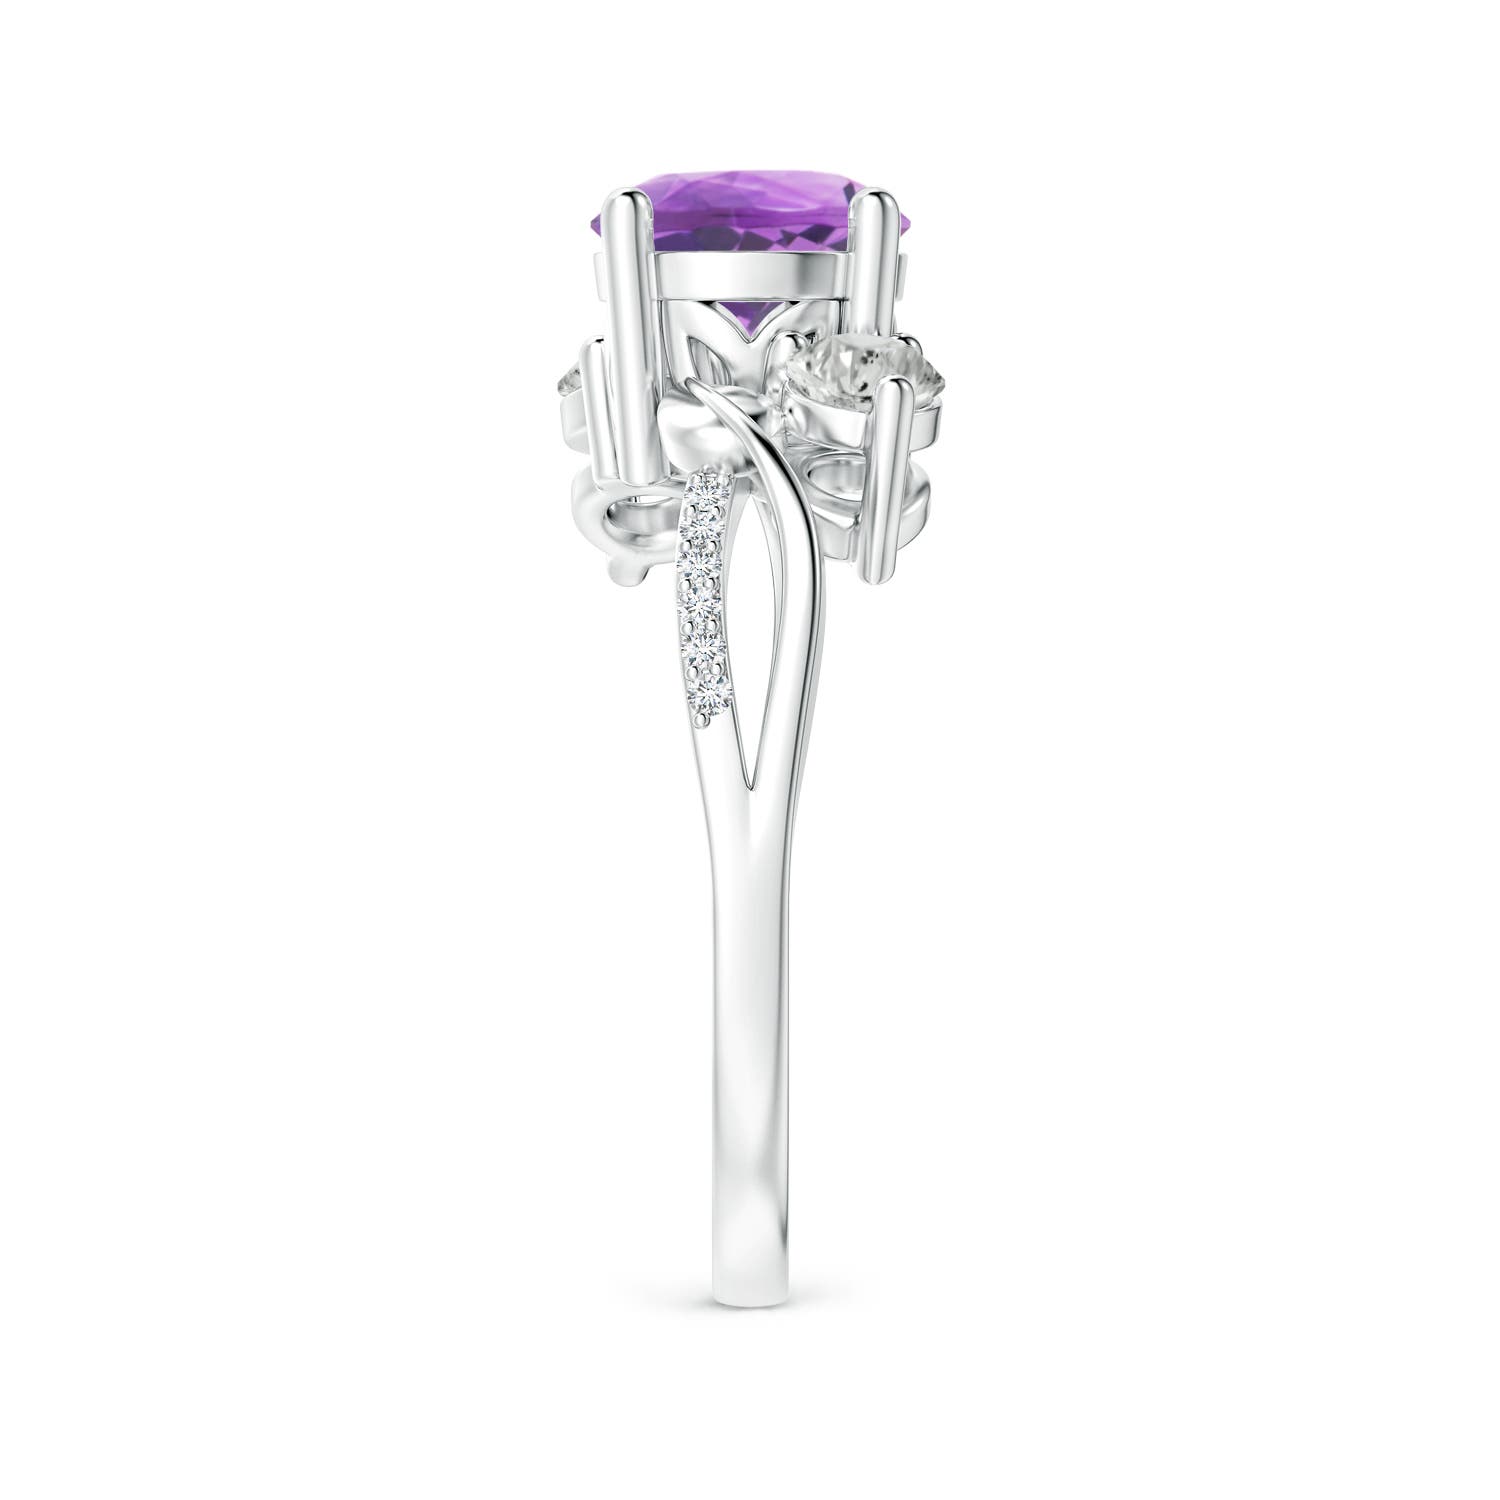 A - Amethyst / 1.53 CT / 14 KT White Gold